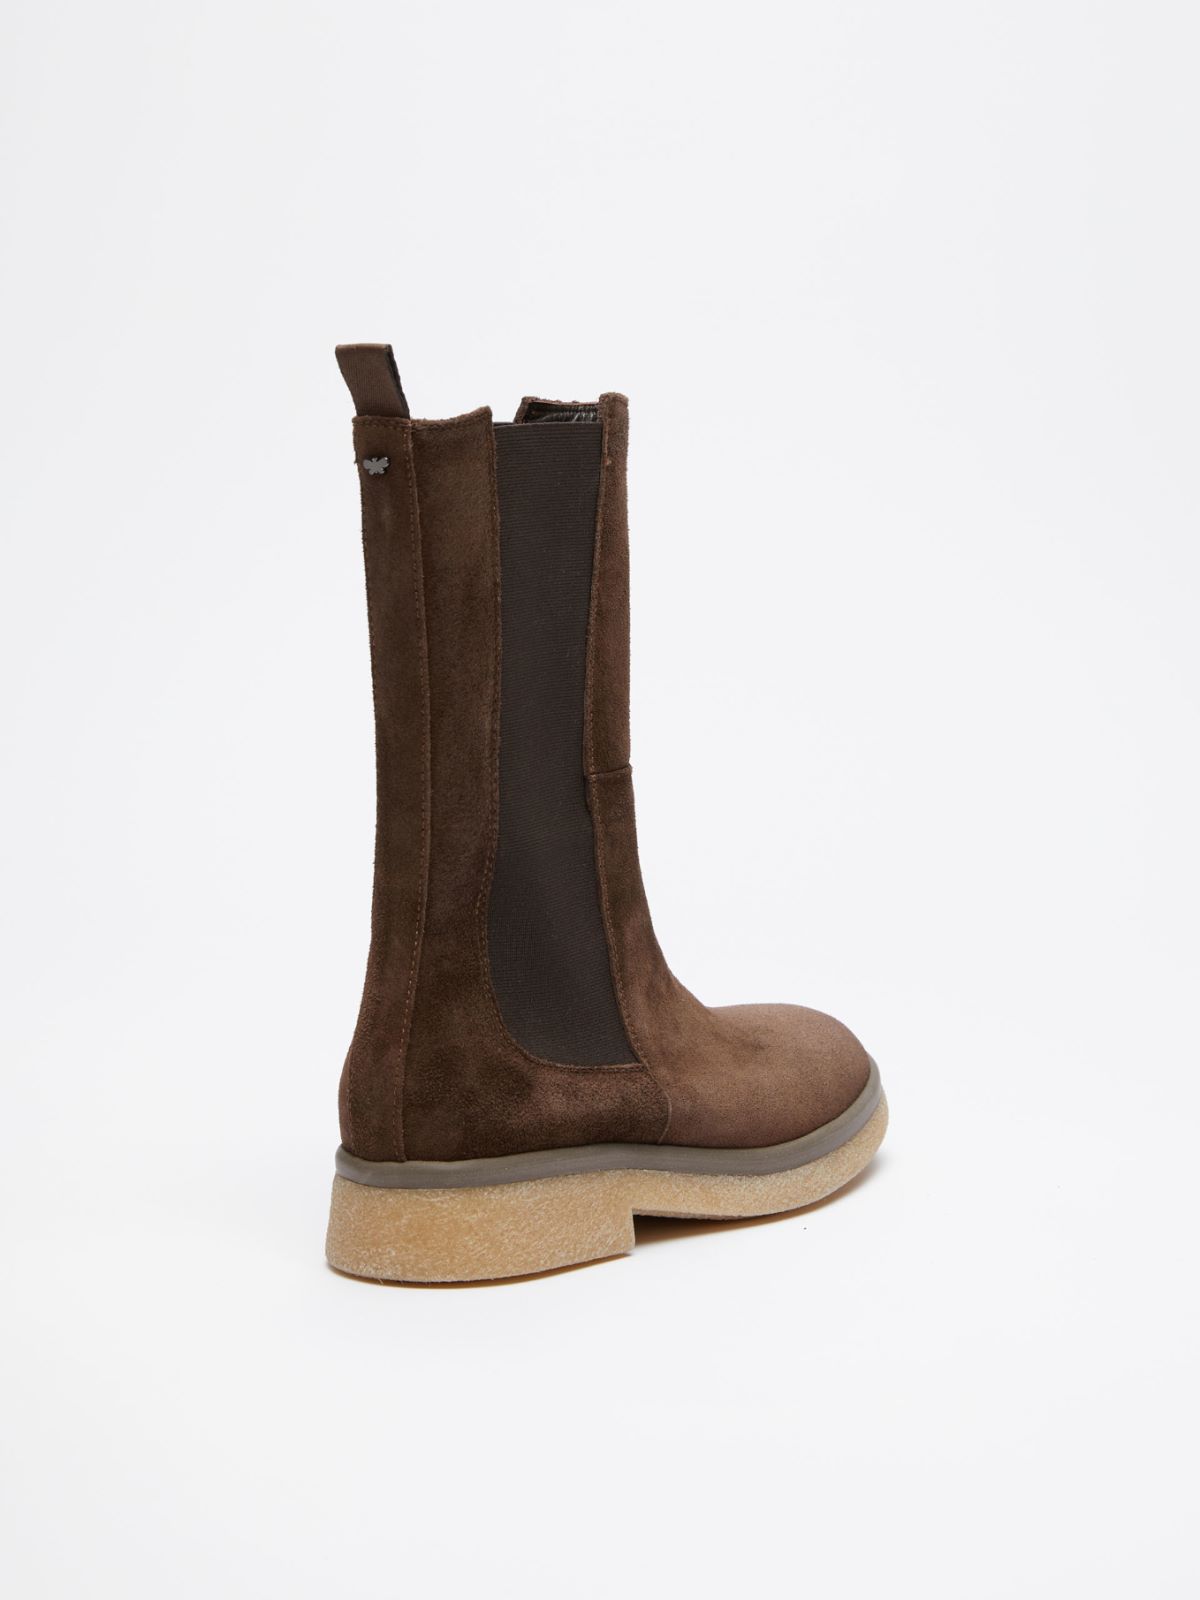 Leather ankle boots - DARK BOWN - Weekend Max Mara - 3